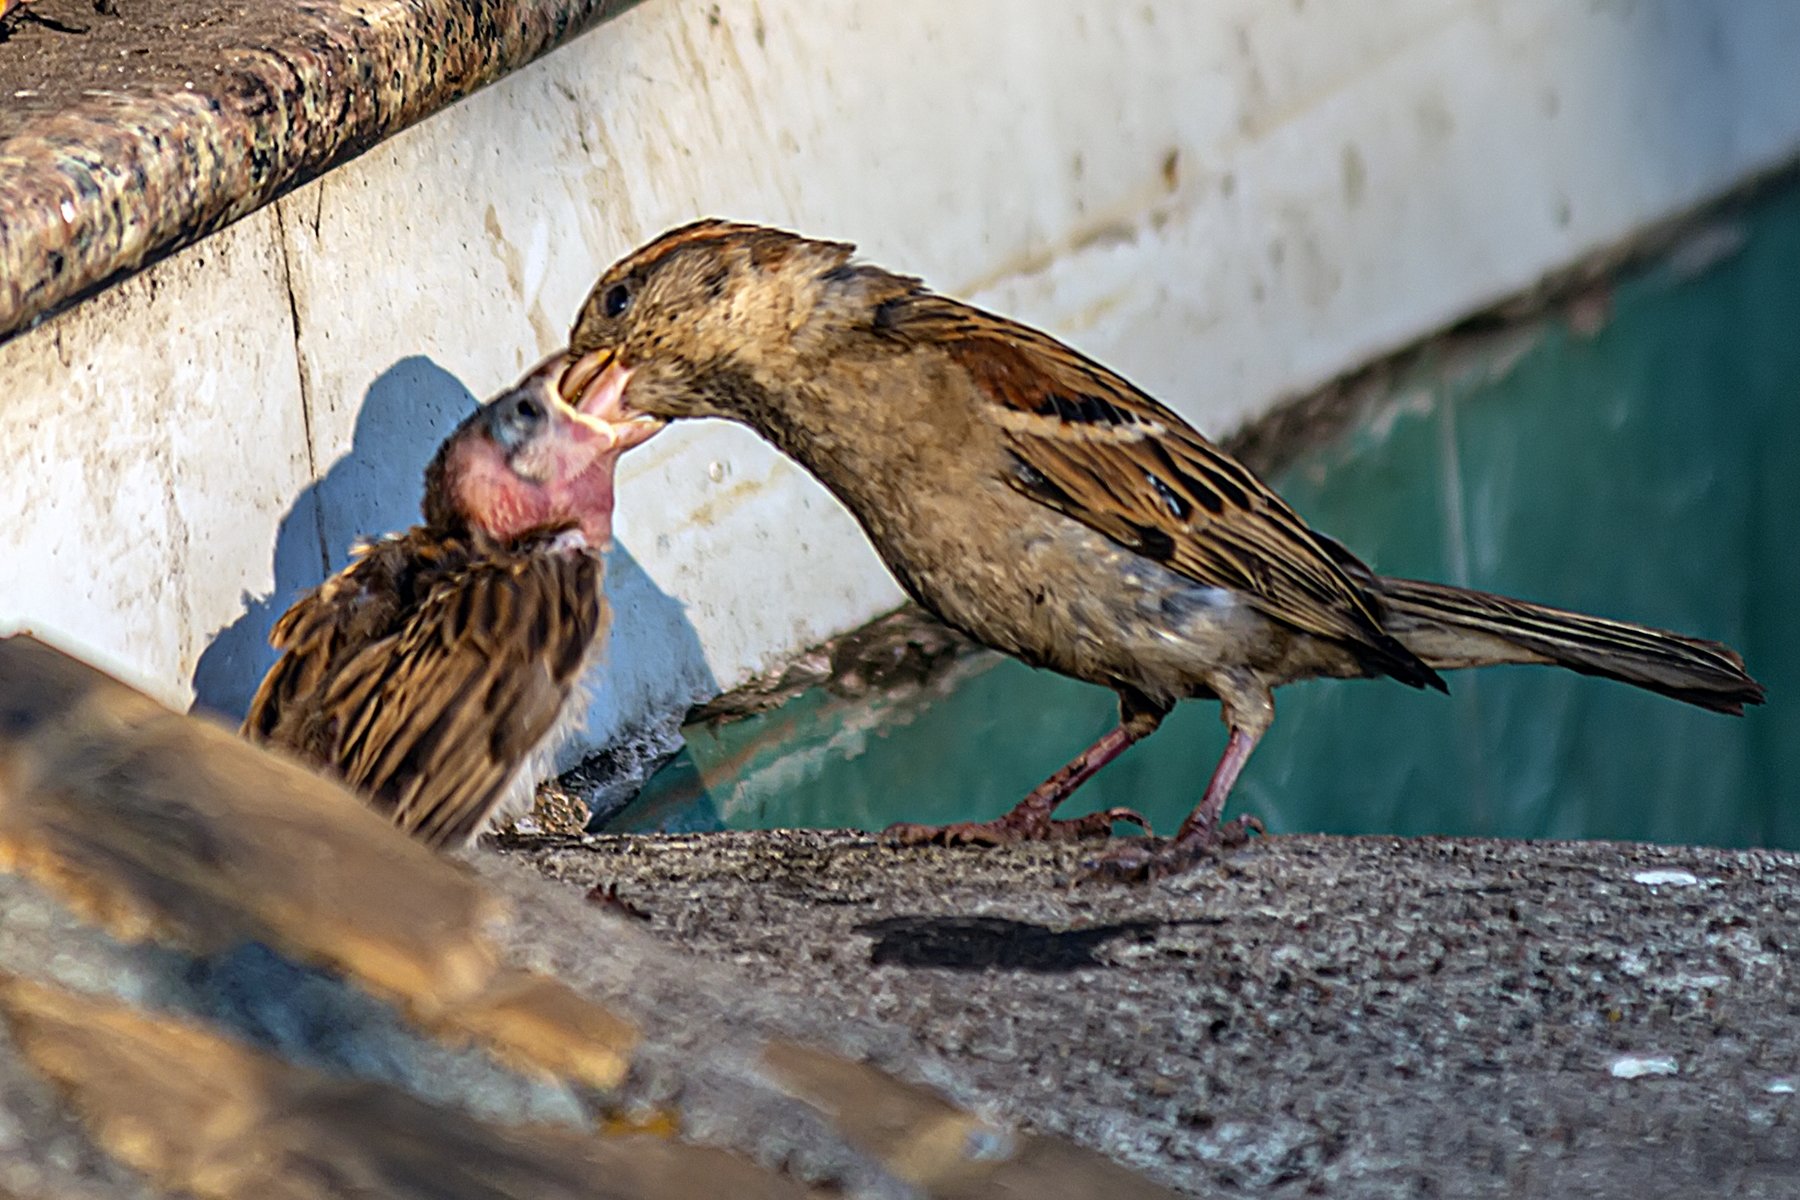 baby bird care, baby, birds, care, nature, animals, eating, outdoor, time, National Geographic, photo, beautiful, NeCoTi ChonTin